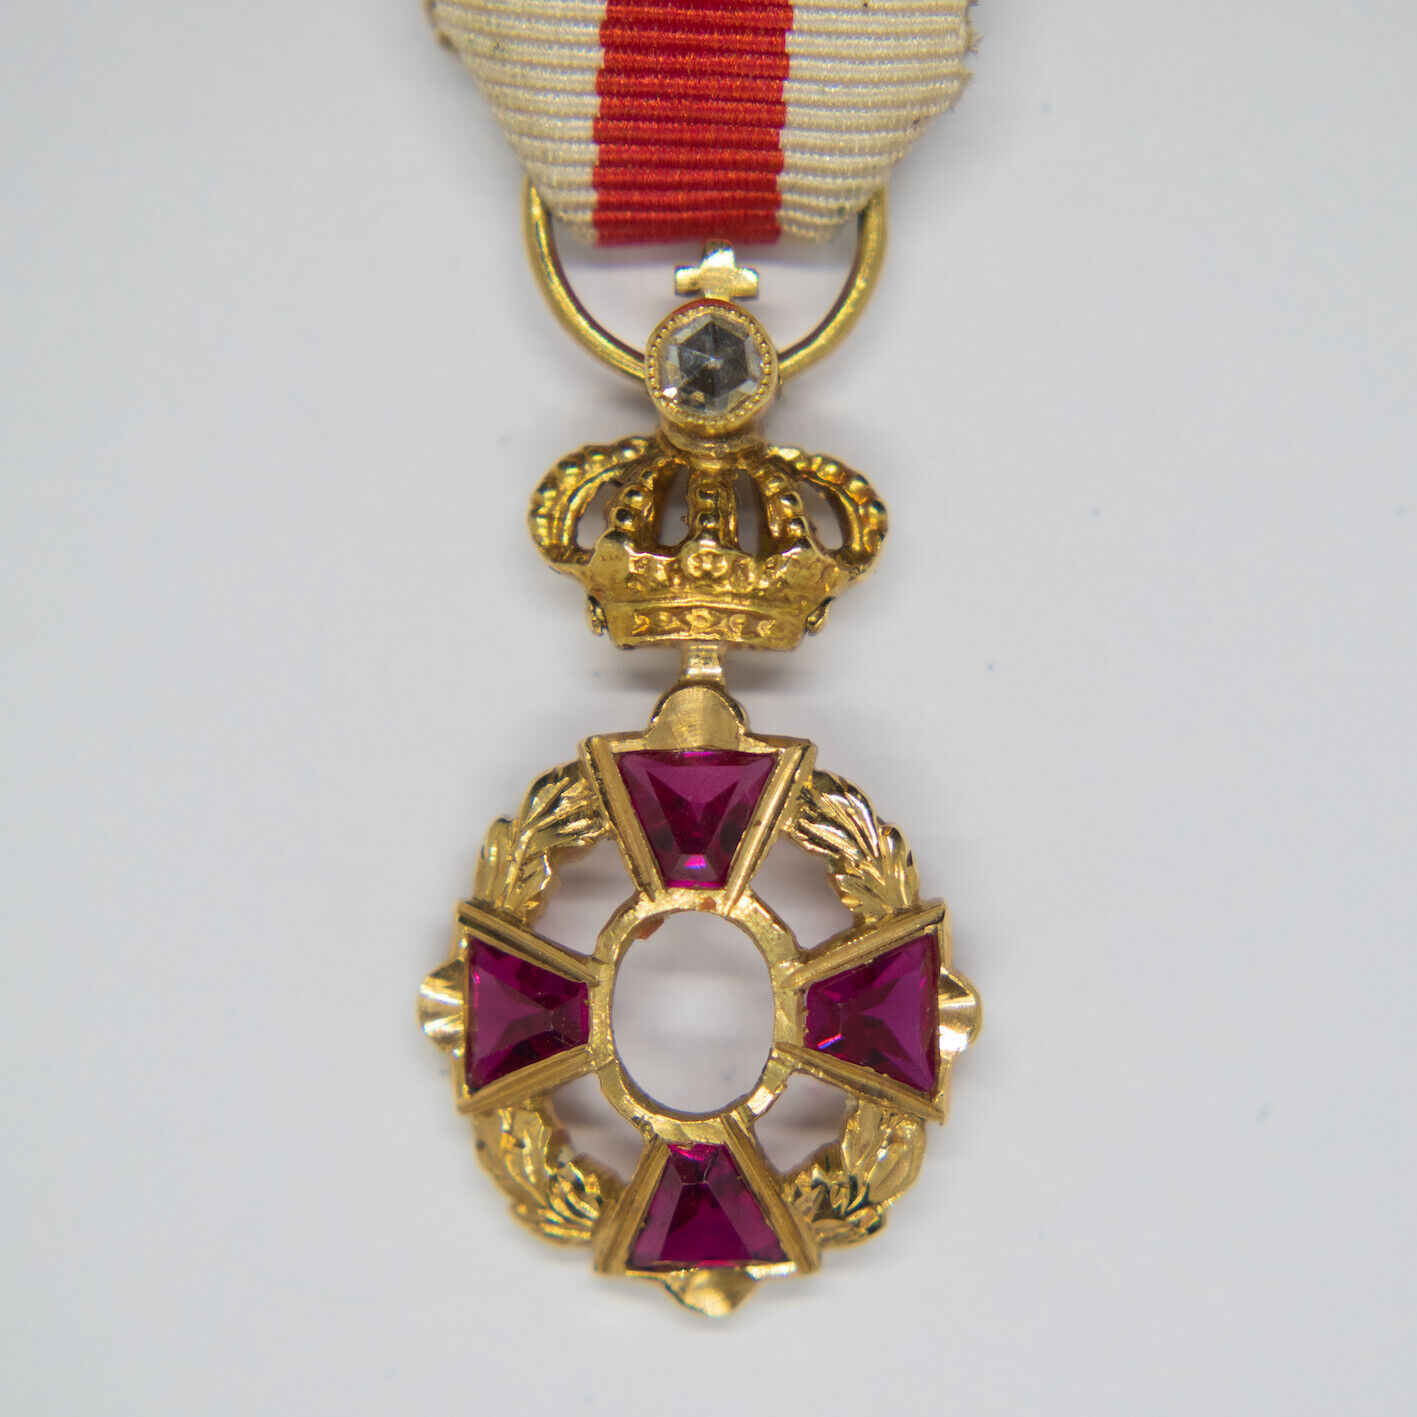 Belgique. Very Belle Medal Miniature Of Blood Donor World War 2 Army, IN Gold